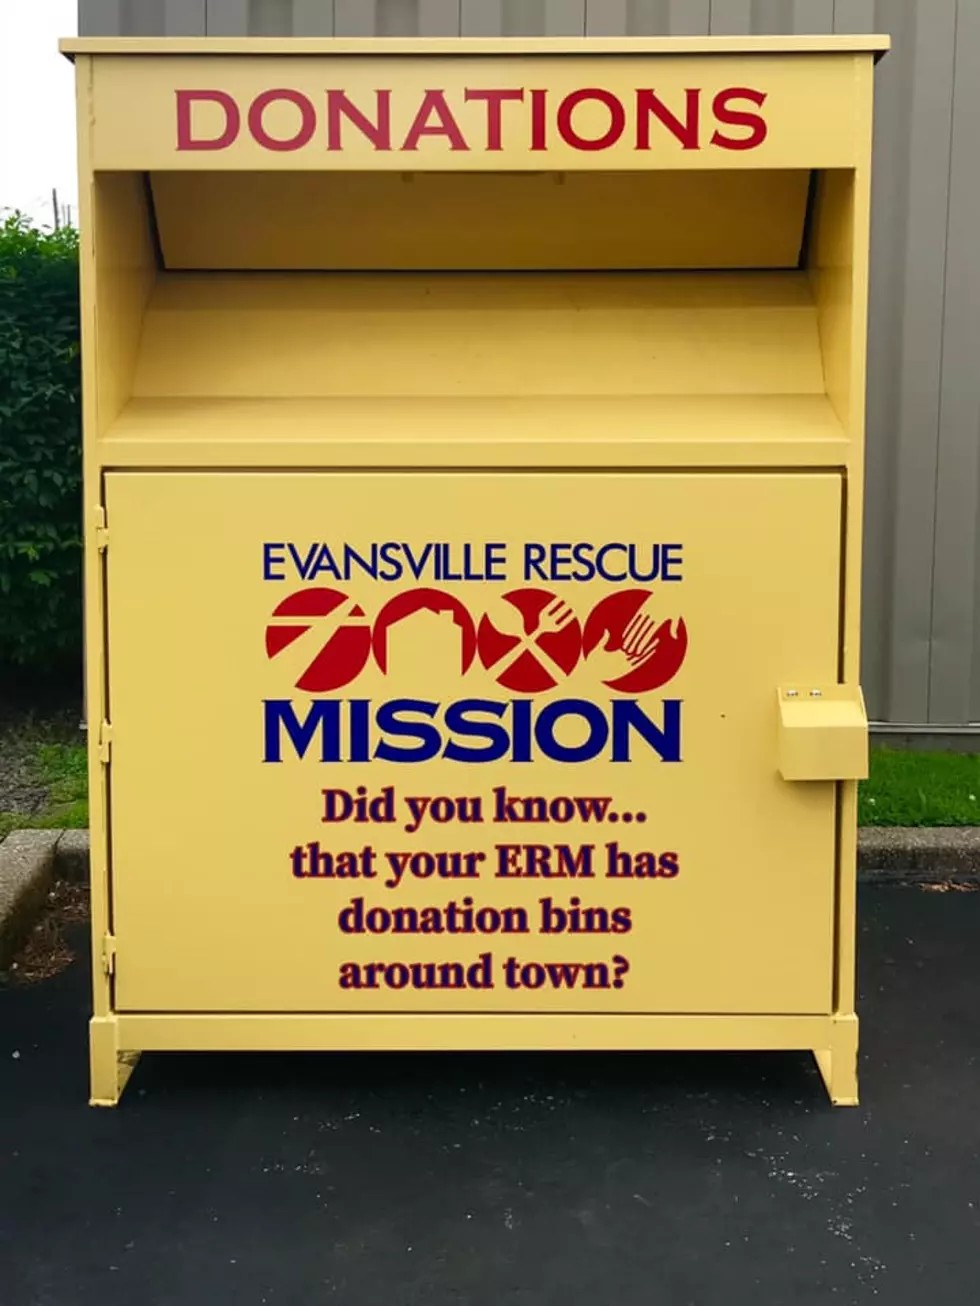 Evansville Rescue Mission Places New Donation Bin on North Side